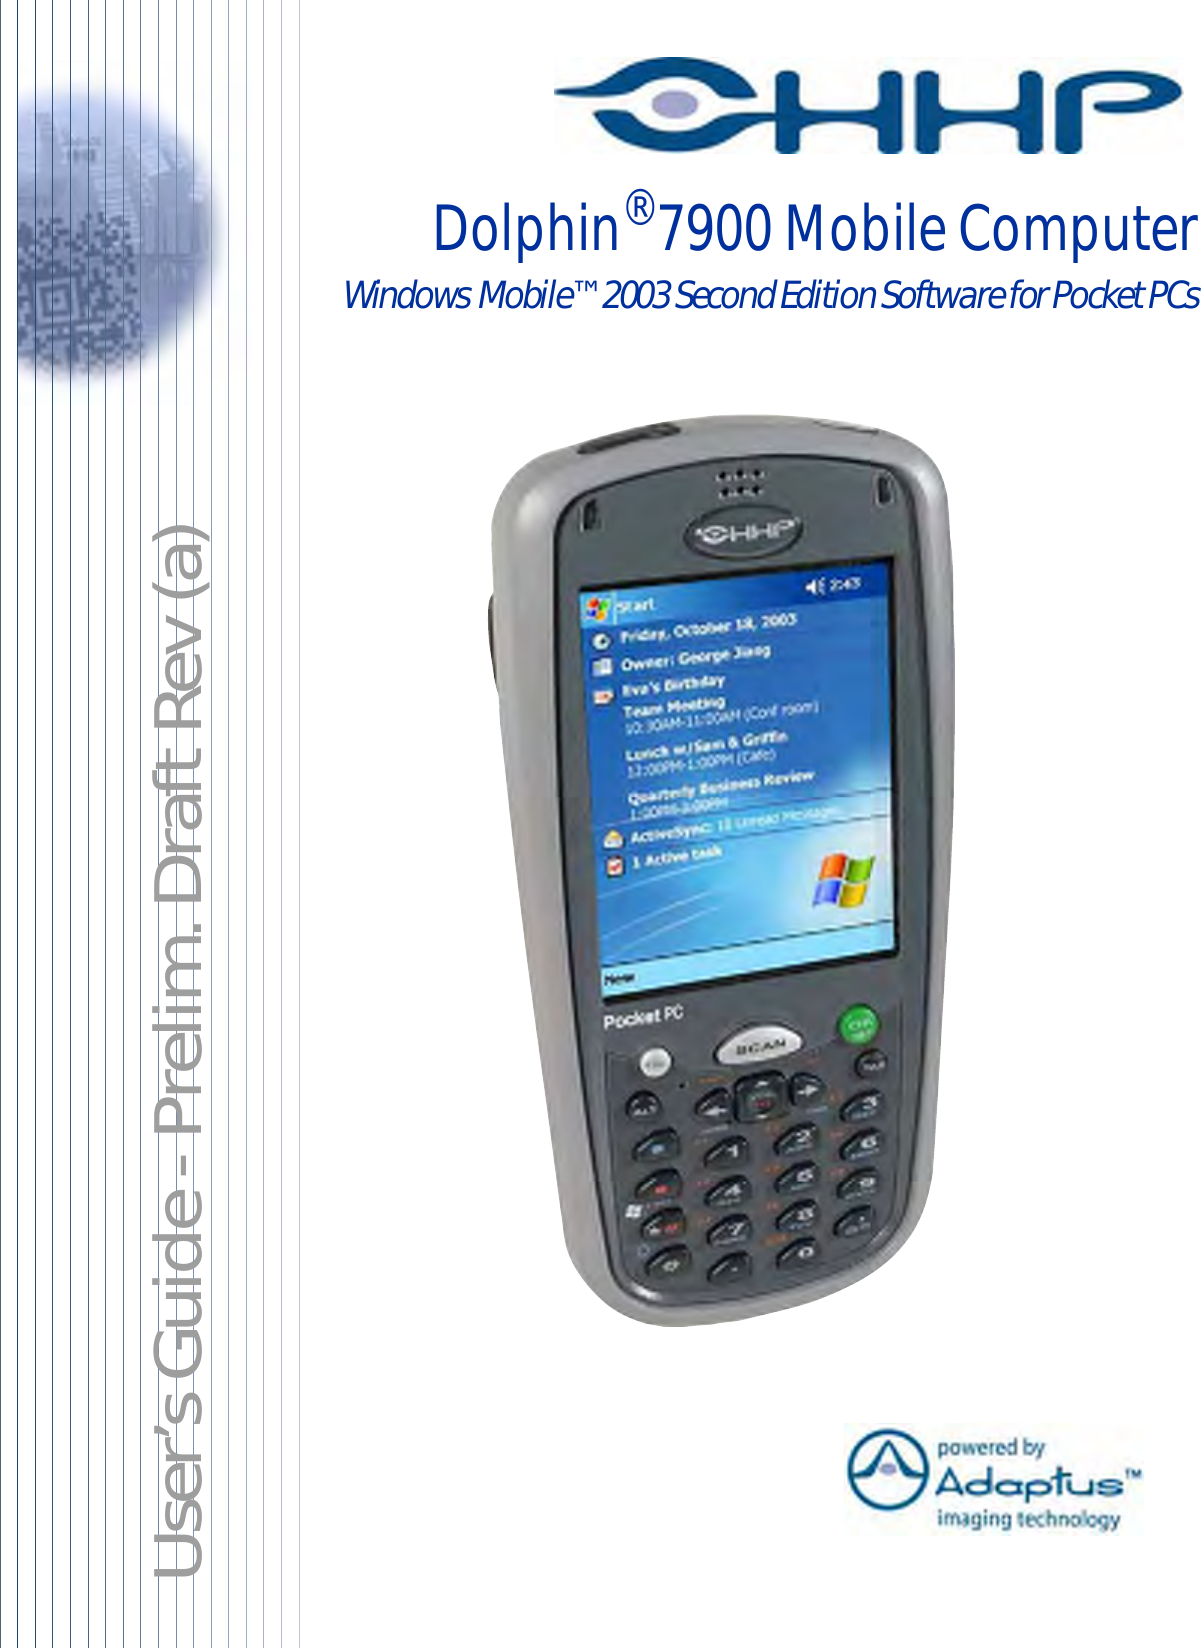 ™ User’s Guide - Prelim. Draft Rev (a)Dolphin® 7900 Mobile Computer Windows Mobile™ 2003 Second Edition Software for Pocket PCs 